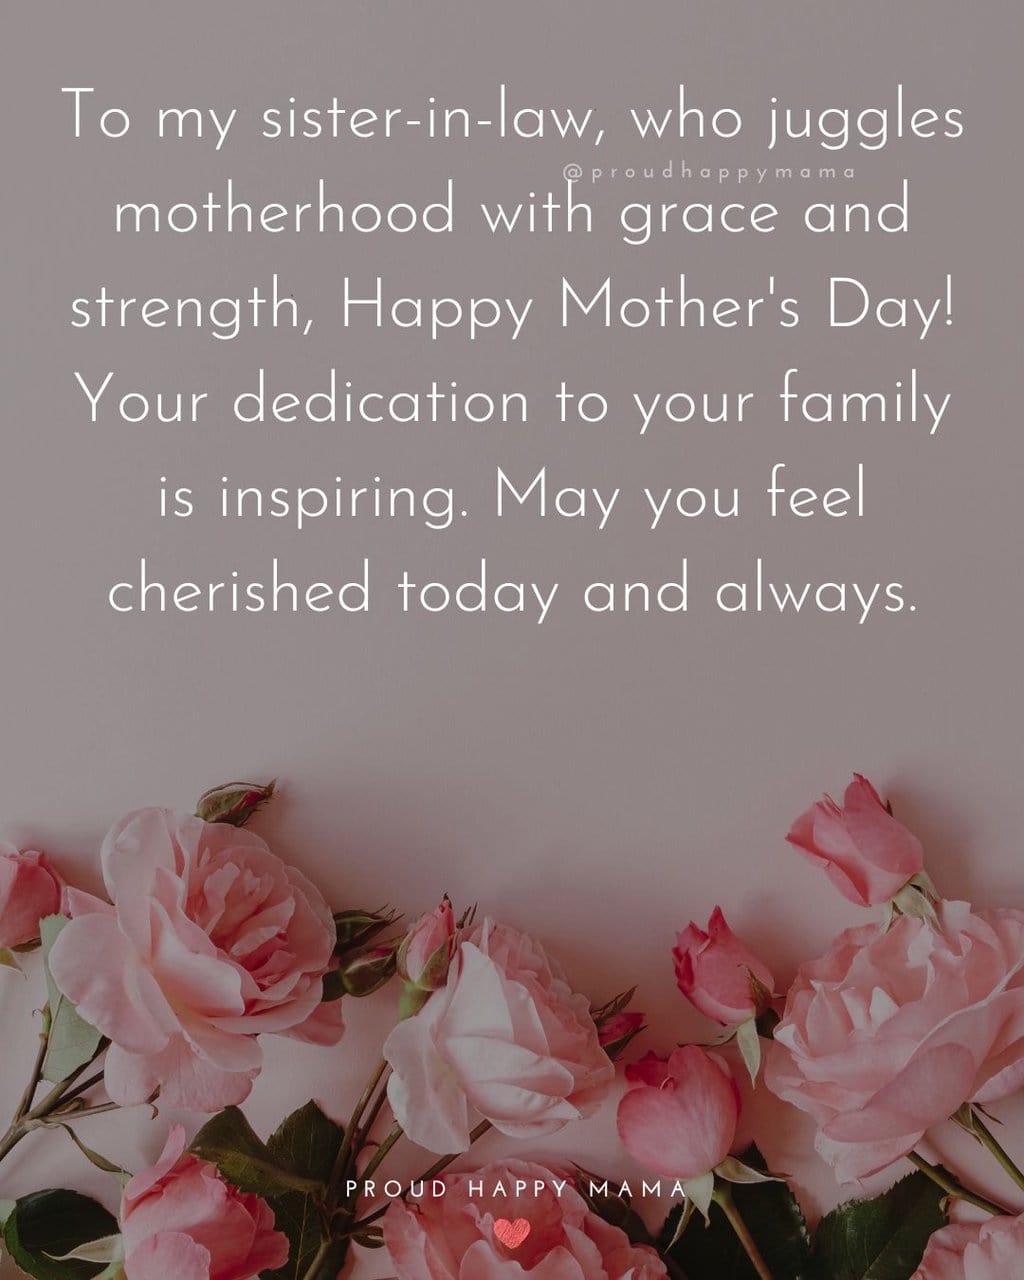 Mother's Day Quotes For Sister-In-Law